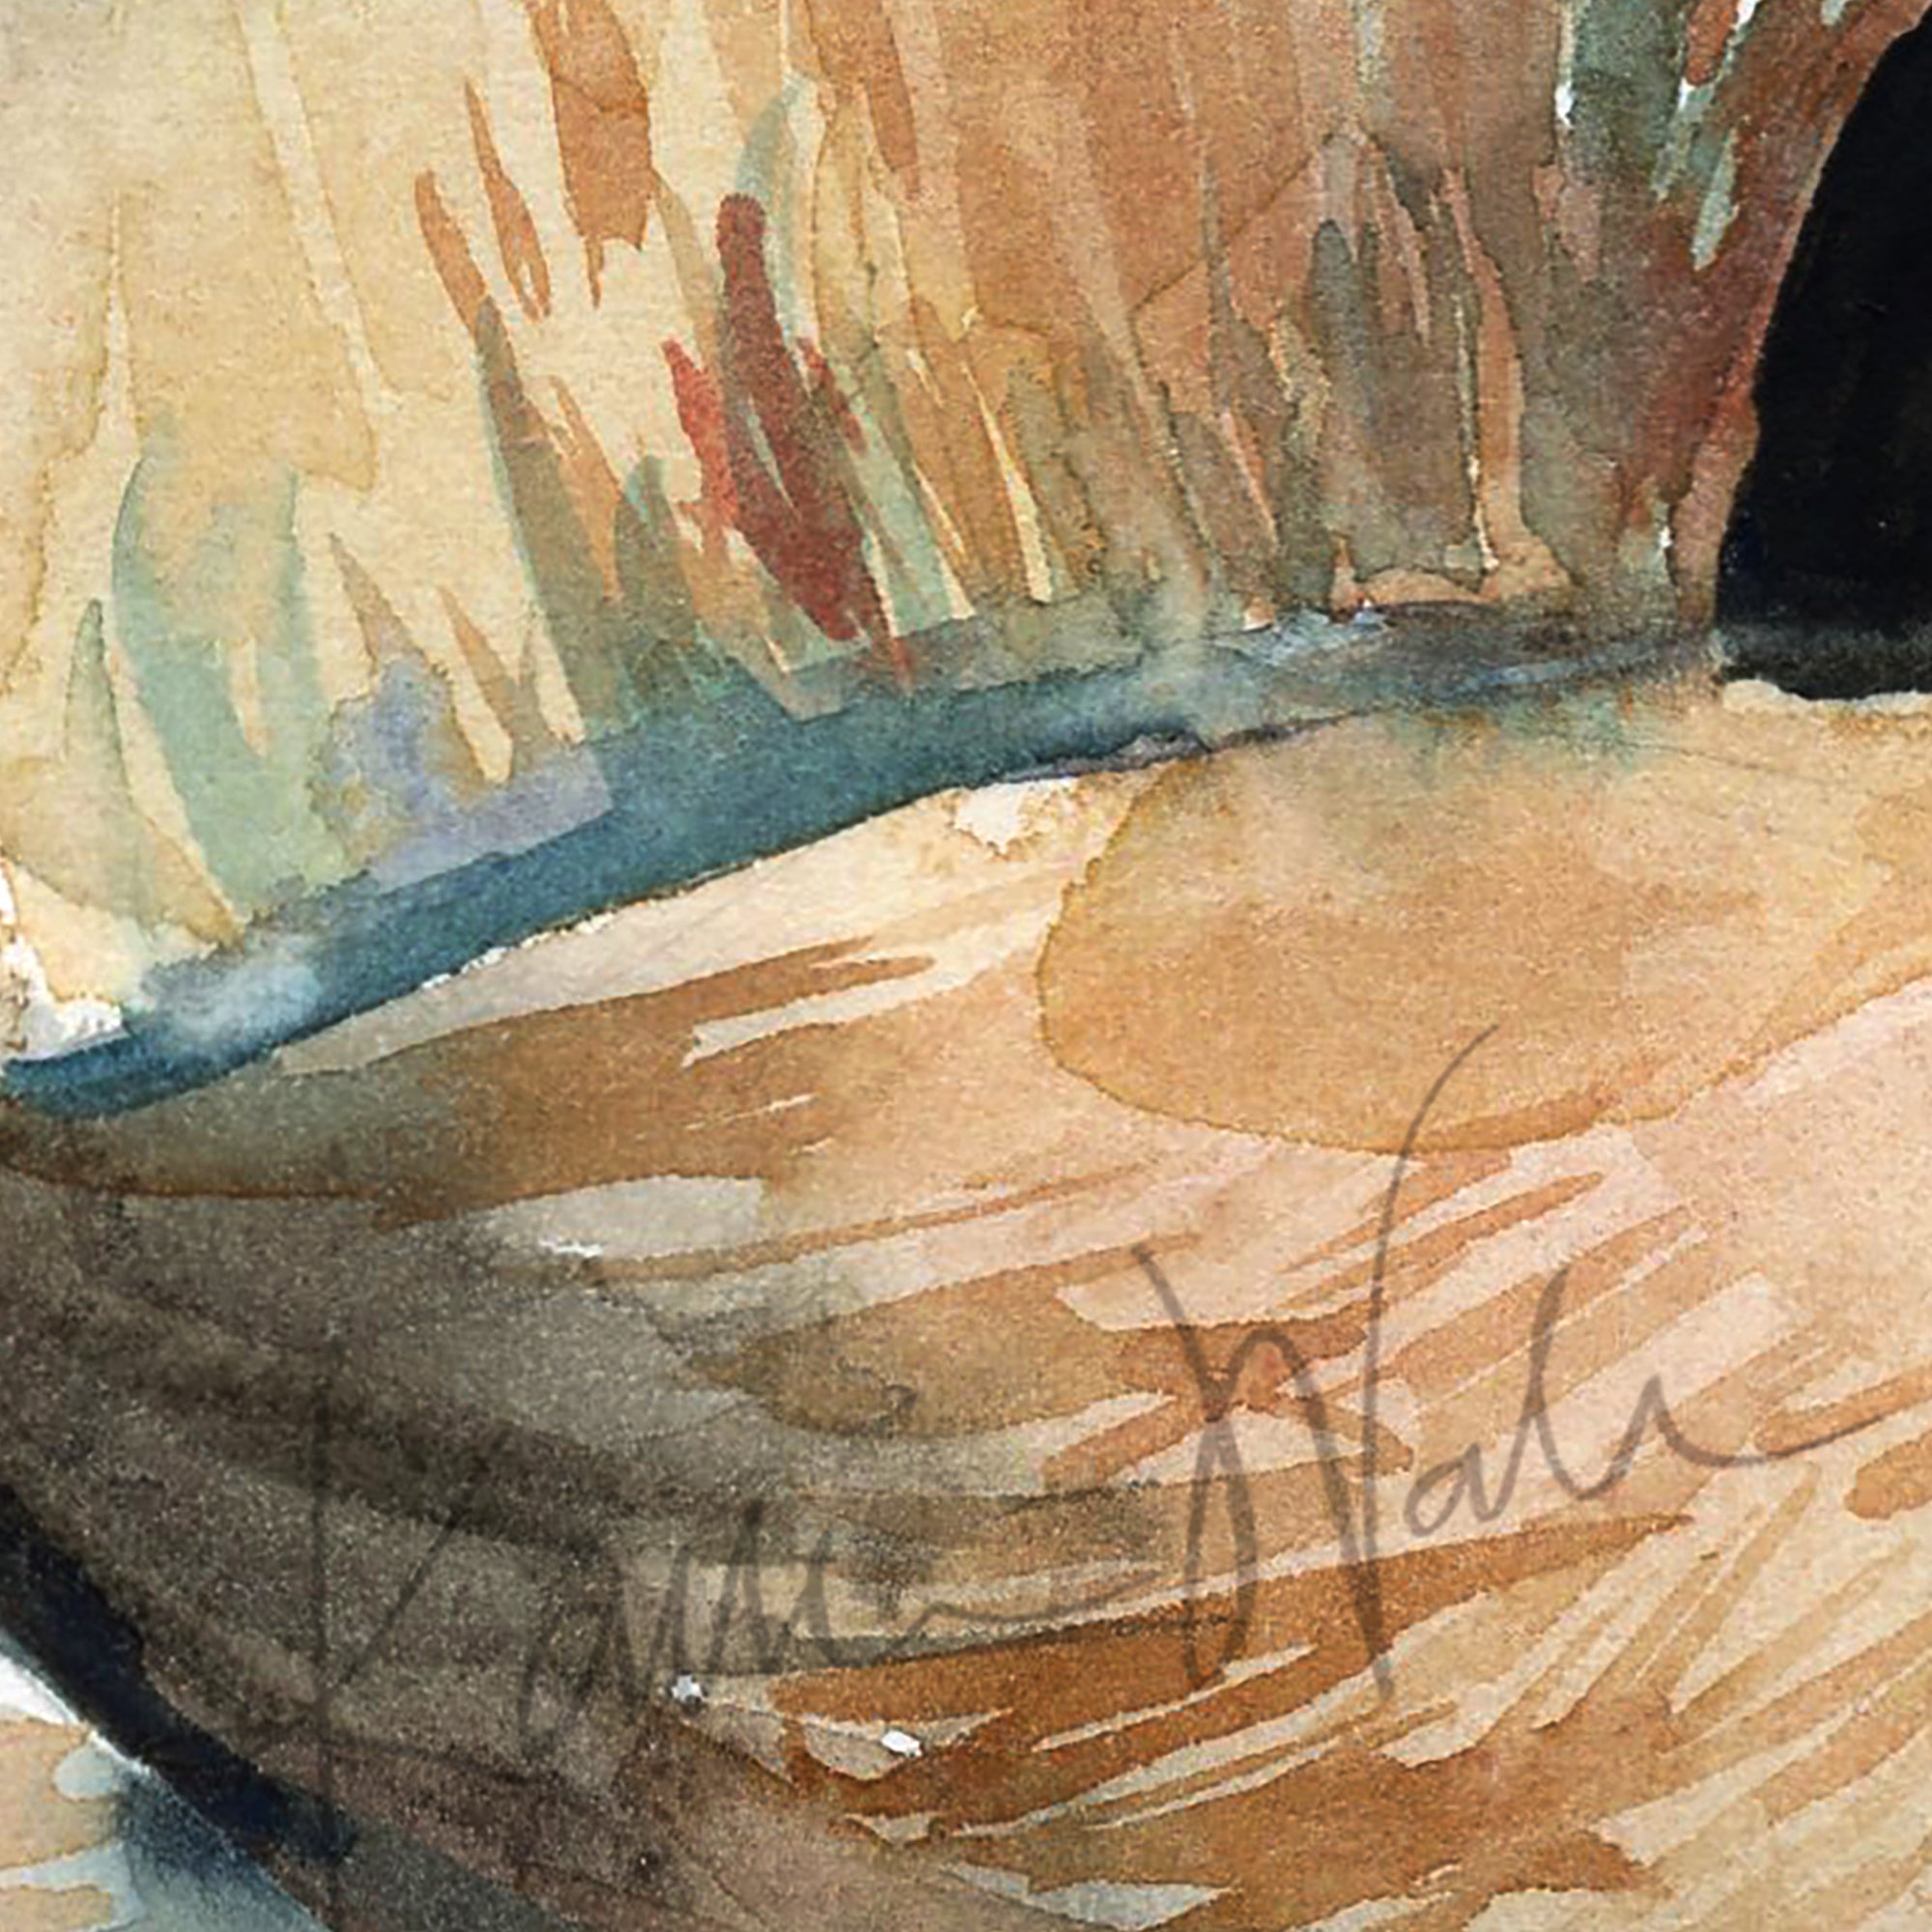 Zoomed in watercolor painting of a zoomed in perspective of a dog tail. The curled pug's tail is tan and black.